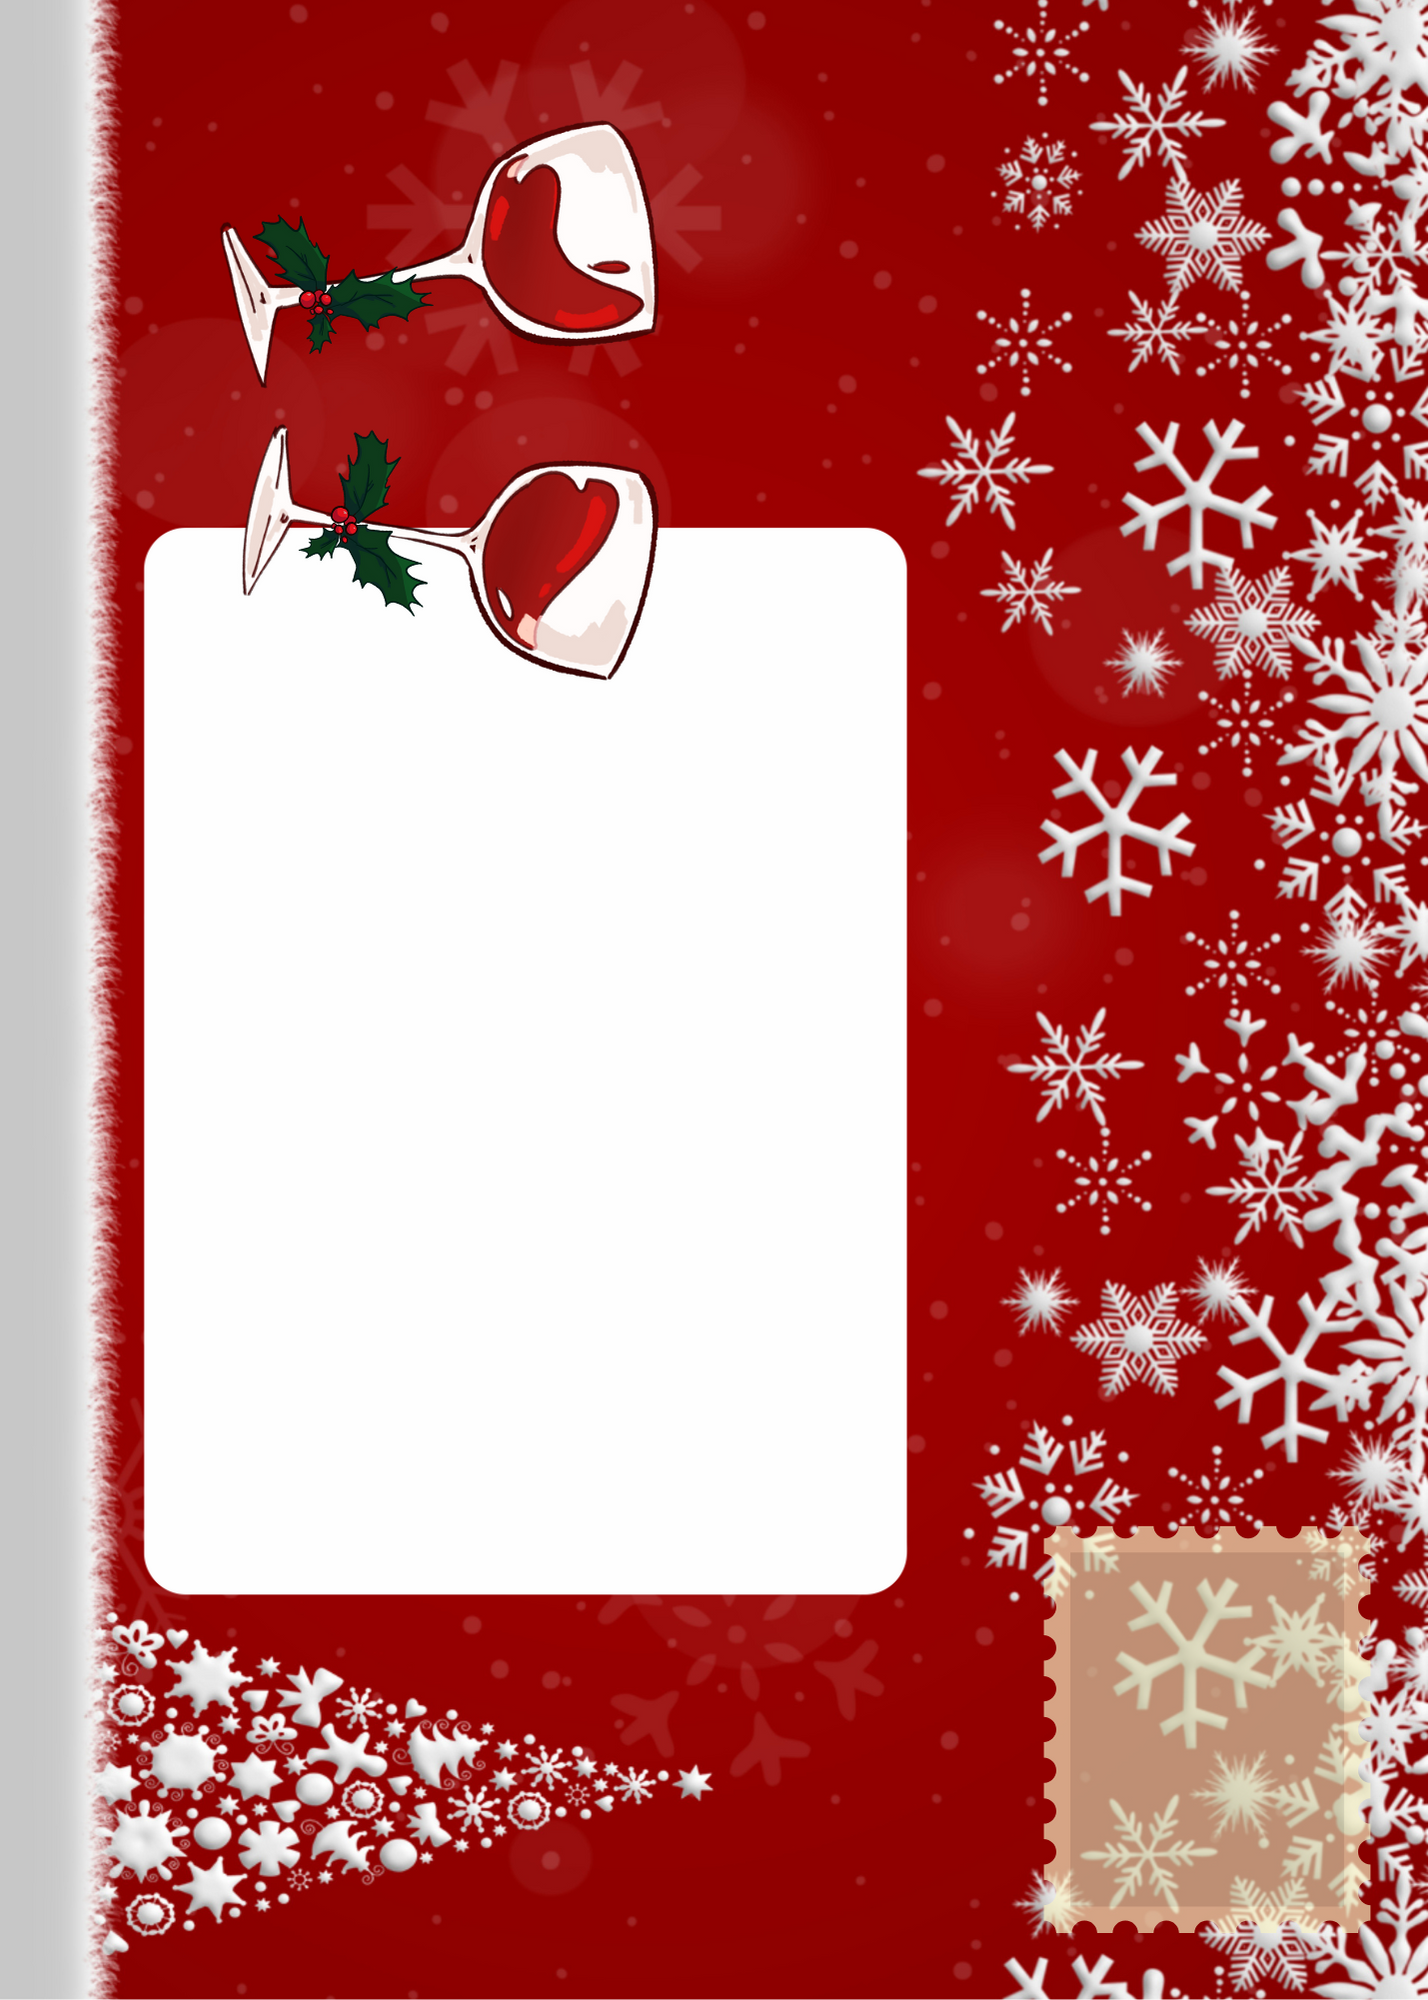 Personalised Christmas Card to send to Special Friends to invite them for a drink this festive season